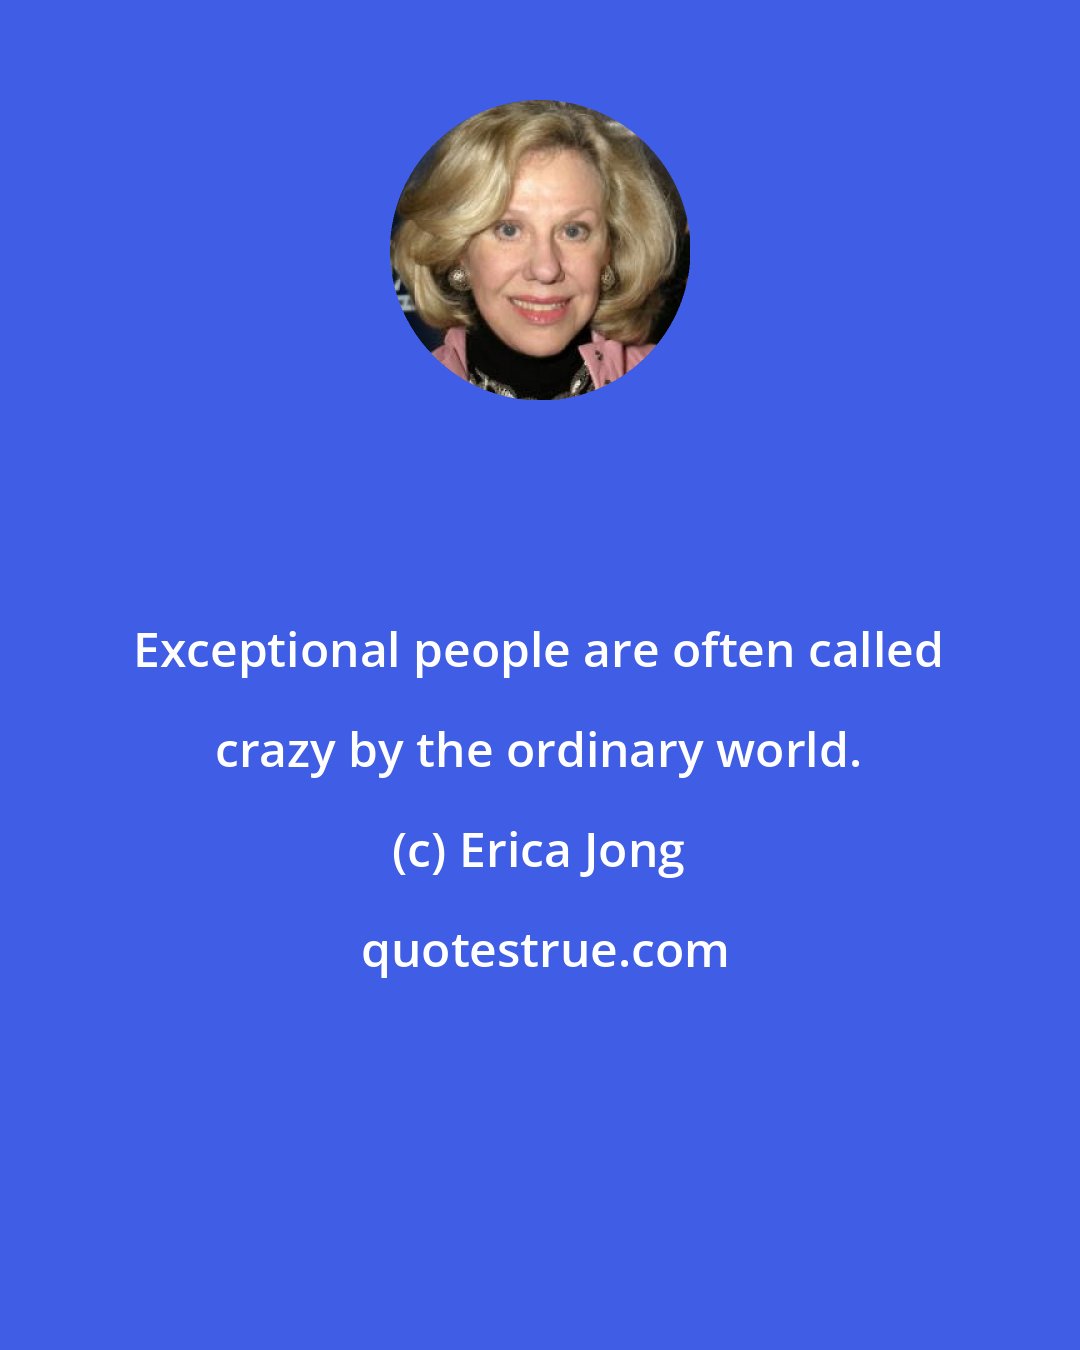 Erica Jong: Exceptional people are often called crazy by the ordinary world.